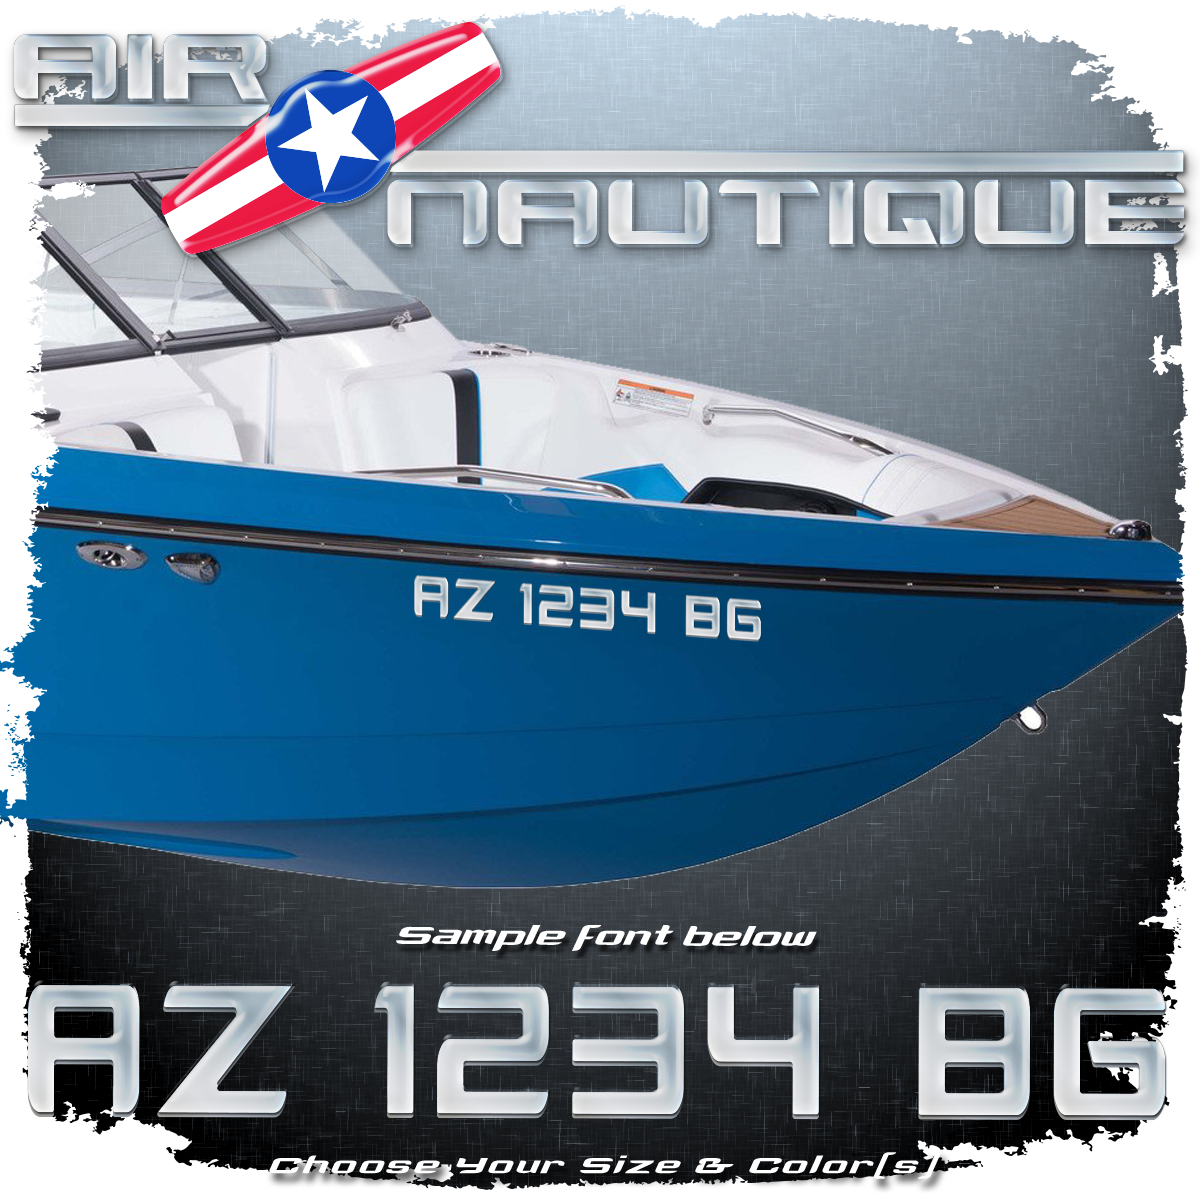 Air & Super Air Nautique 2000-2005 Registration (2 included), Choose Your Own Colors